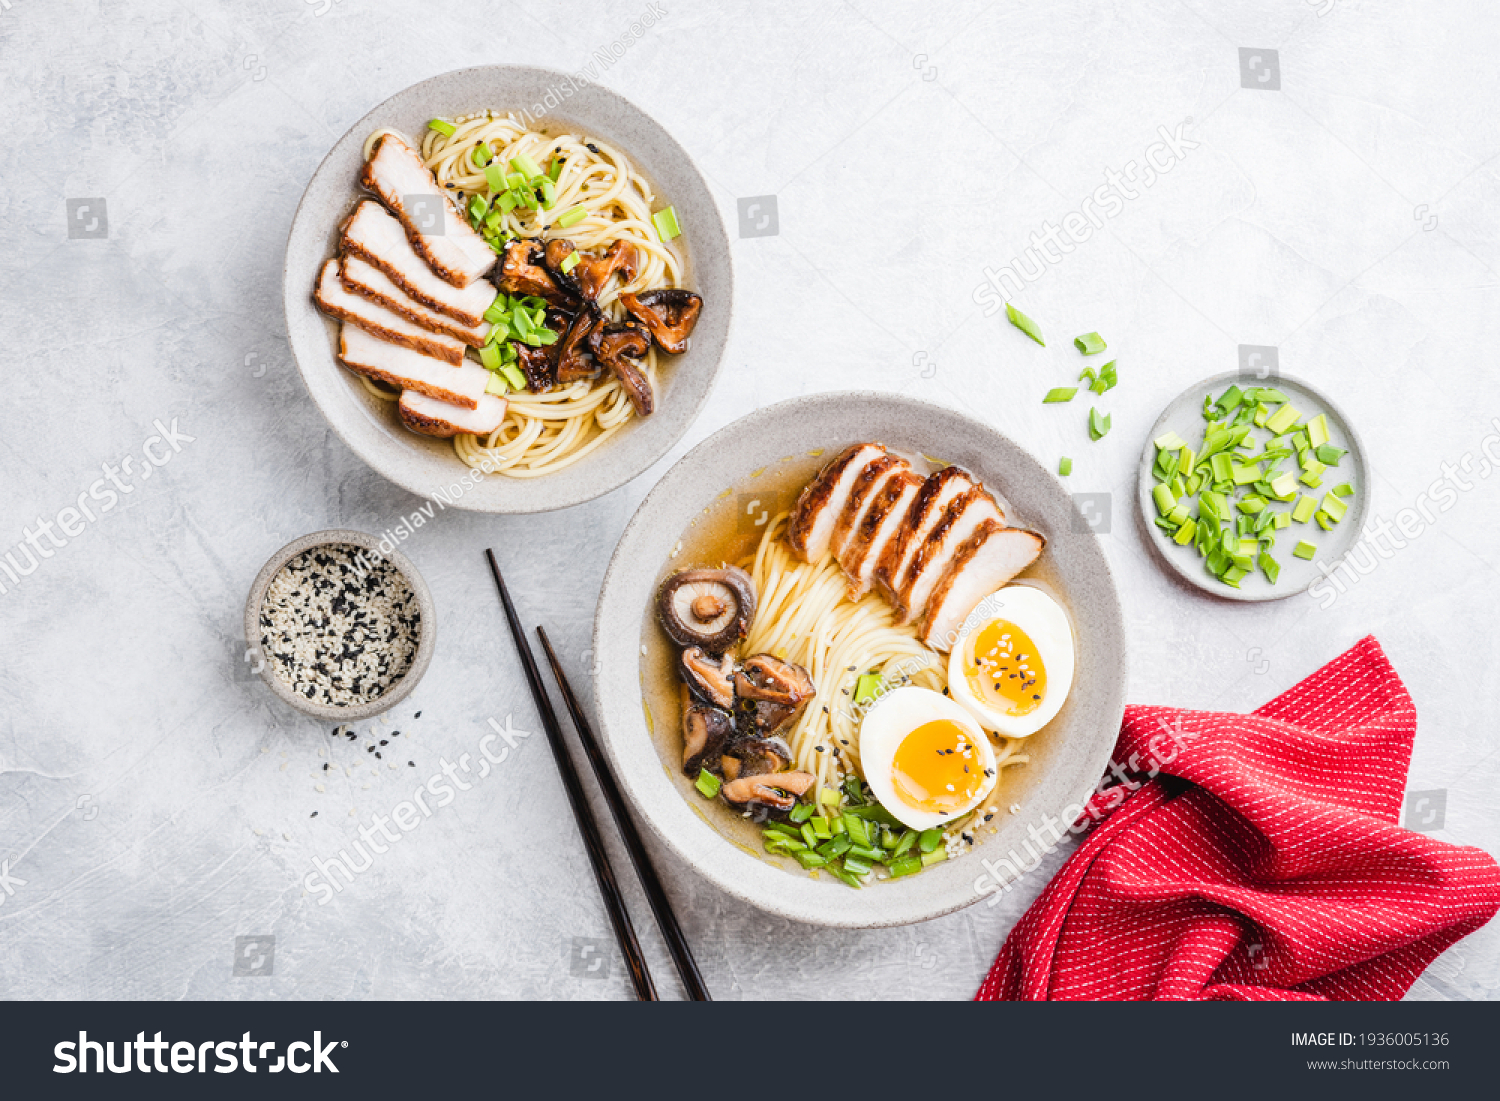 Chicken ramen, asian noodle soup. Two bowls of delicious homemade chicken ramen noodle soup with shiitake mushrooms on a grey concrete background, table top view #1936005136